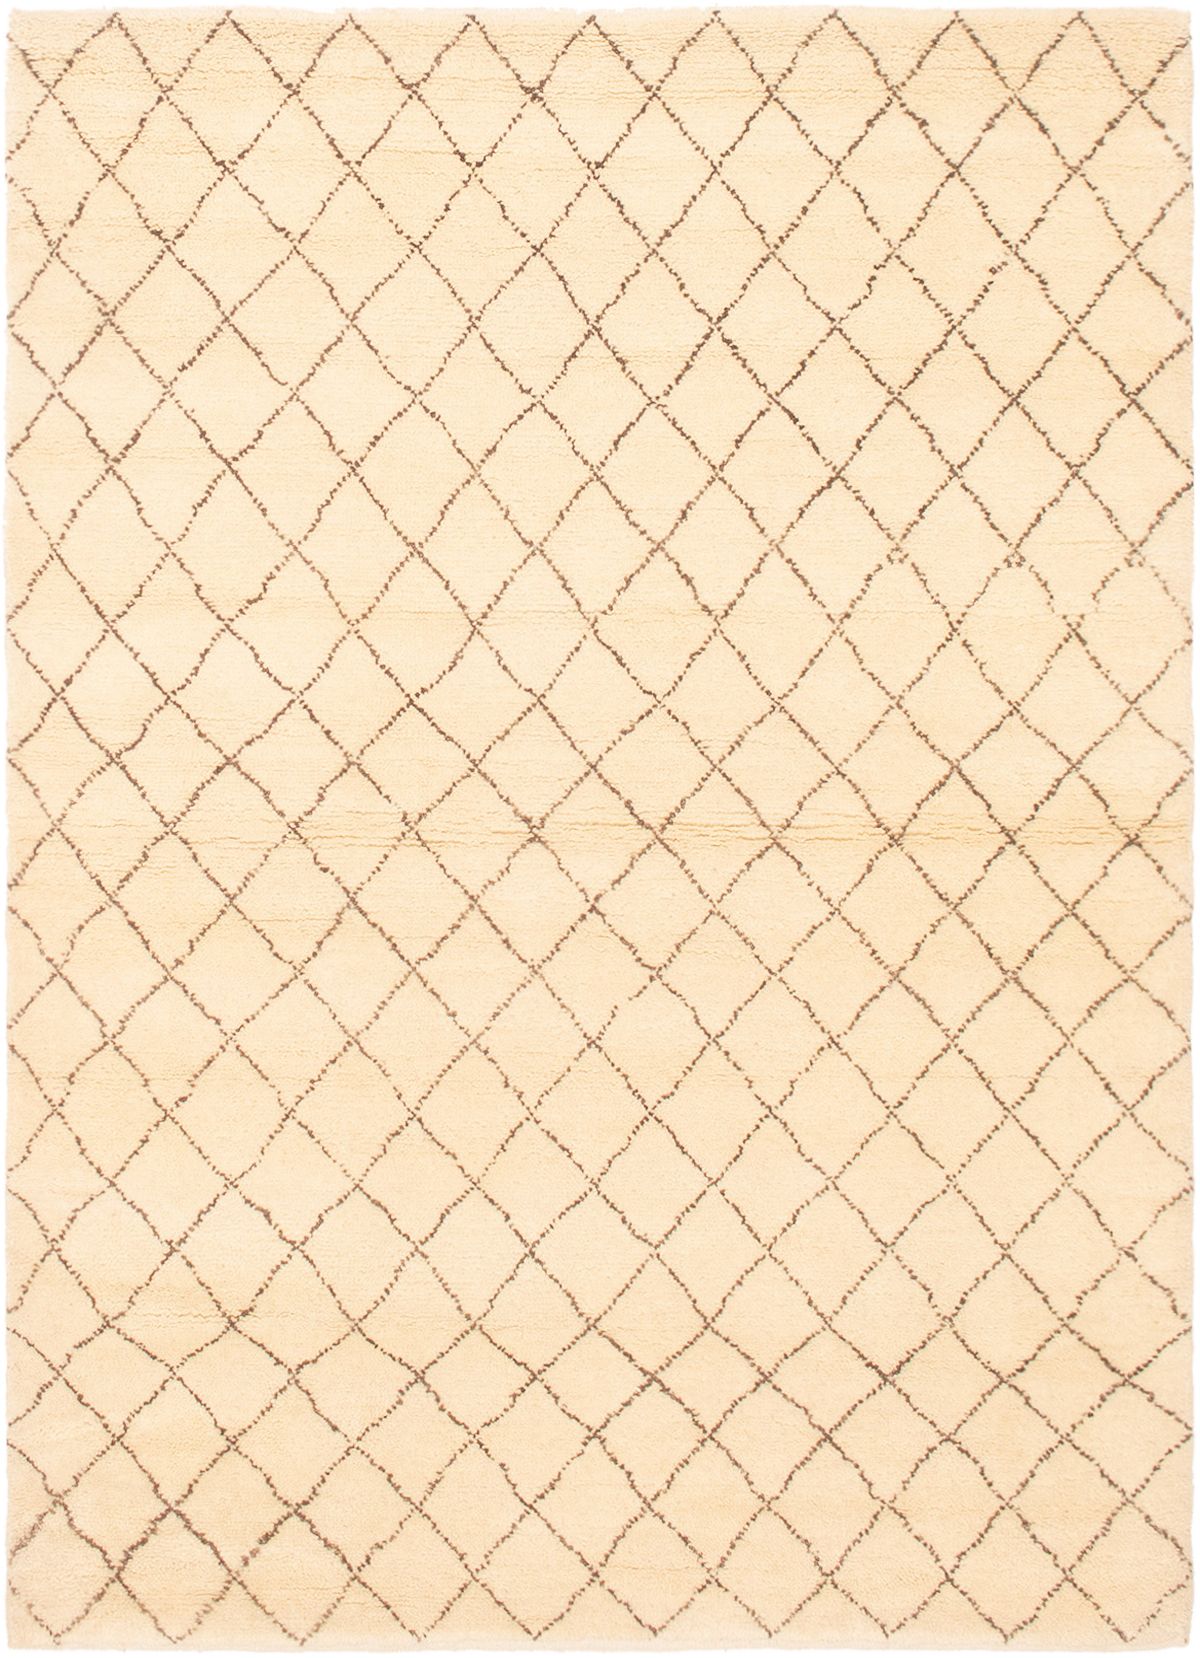 Hand-knotted Tangier Cream Wool Rug 5'0" x 6'10" Size: 5'0" x 6'10"  